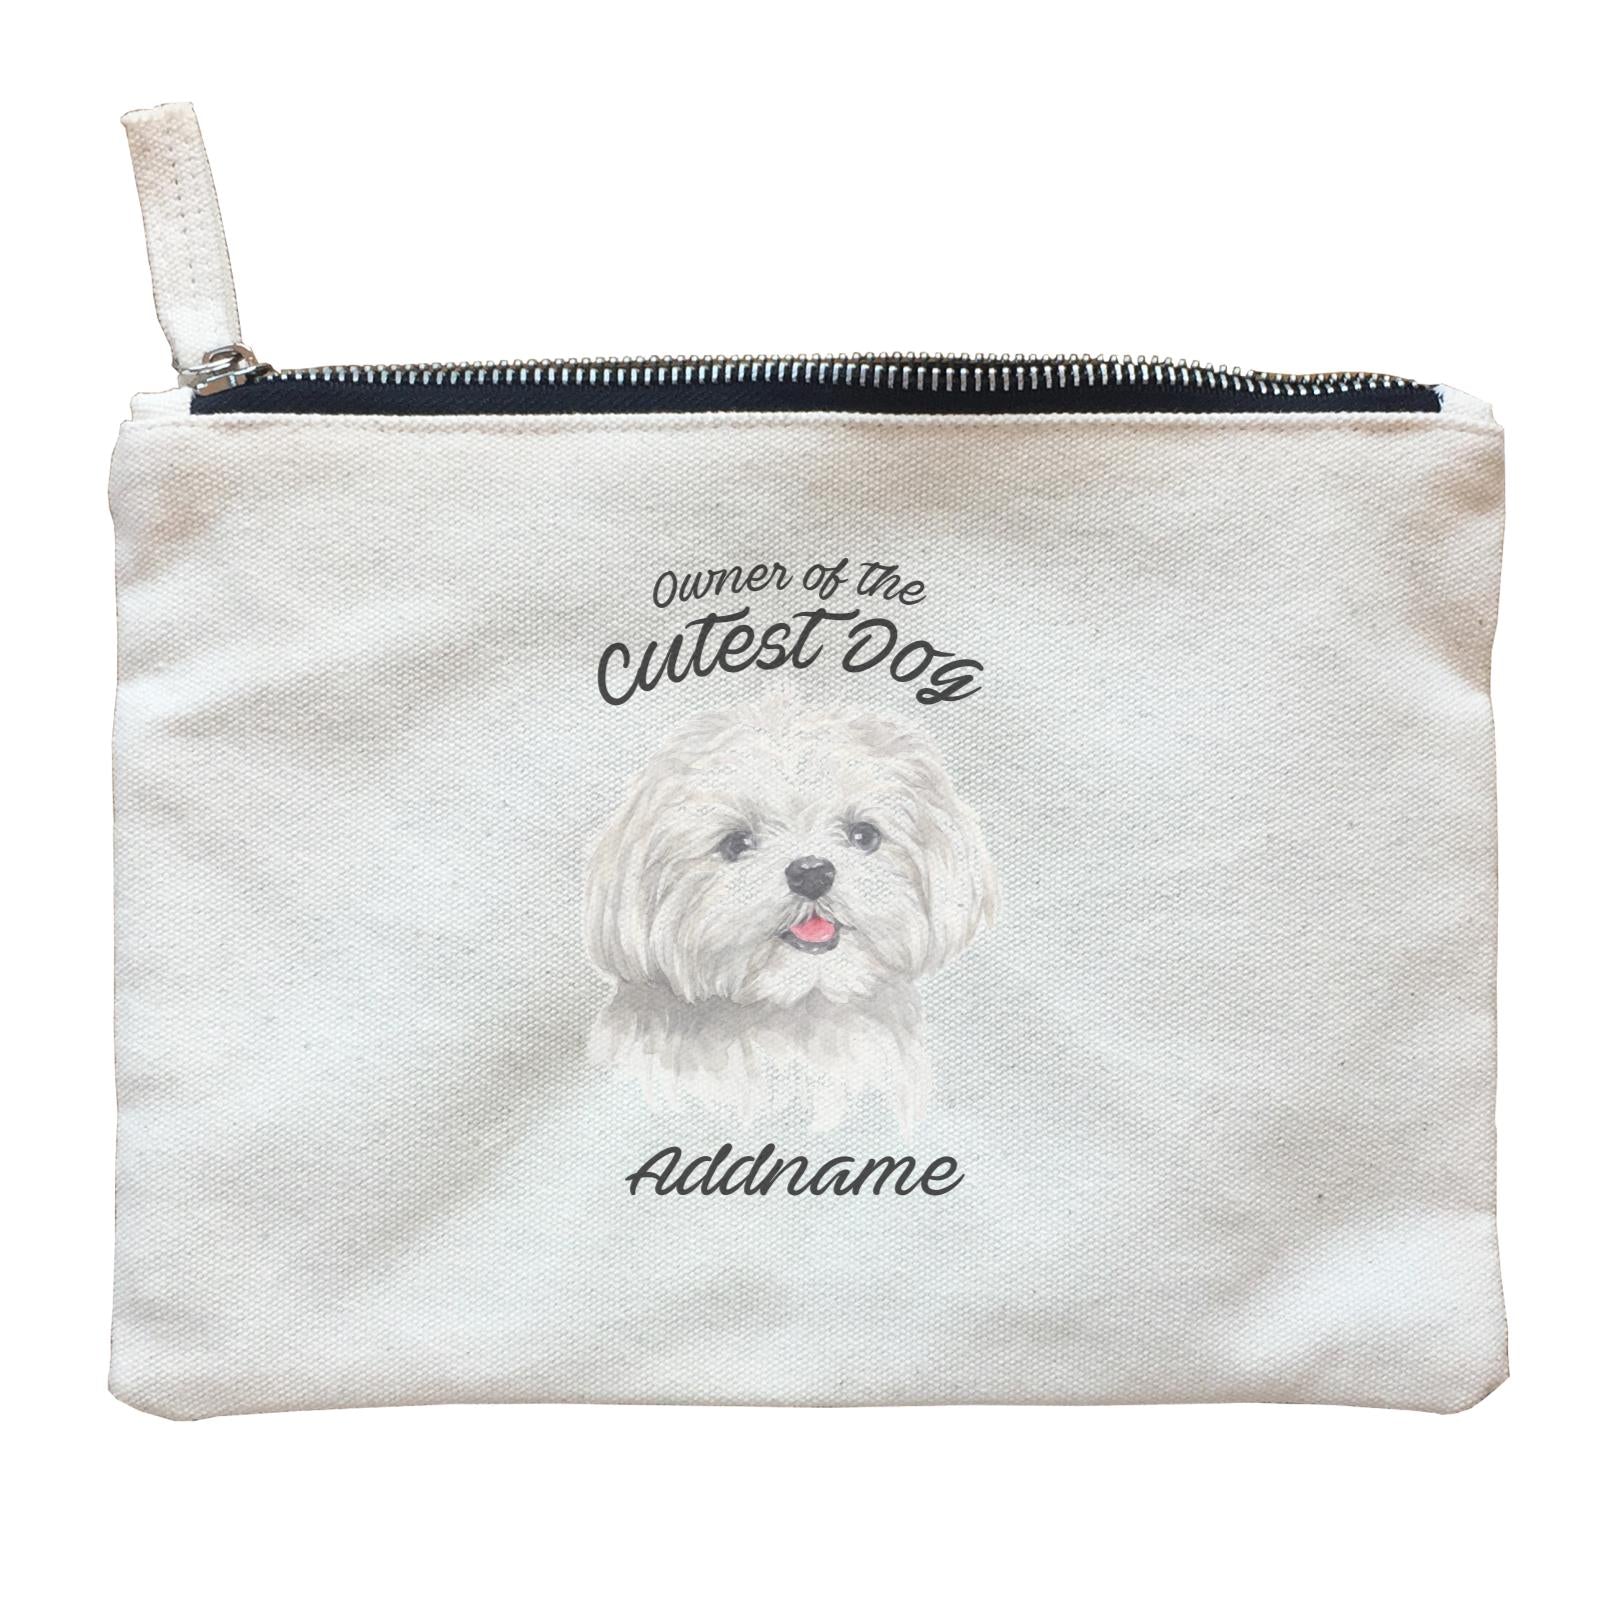 Watercolor Dog Owner Of The Cutest Dog Maltese Addname Zipper Pouch